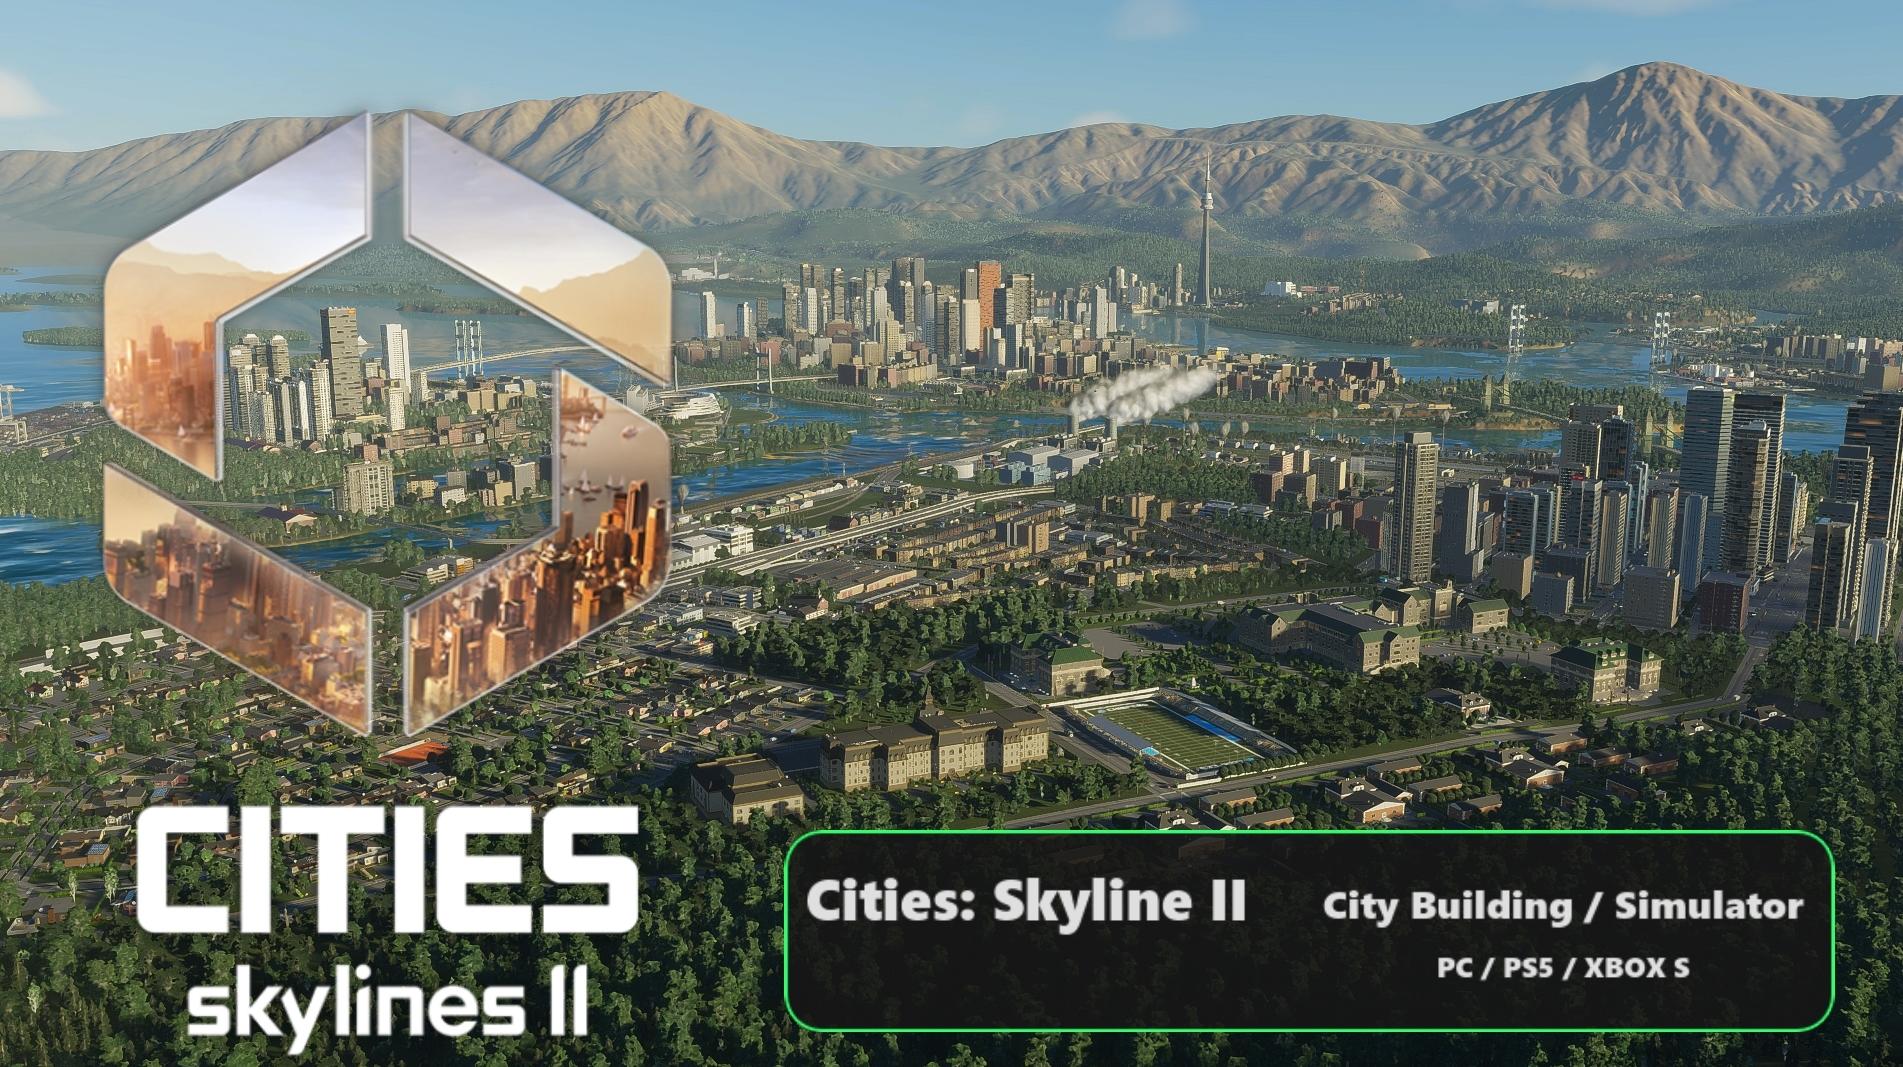 Cities: Skylines 2's troubled launch, and why simulation games are